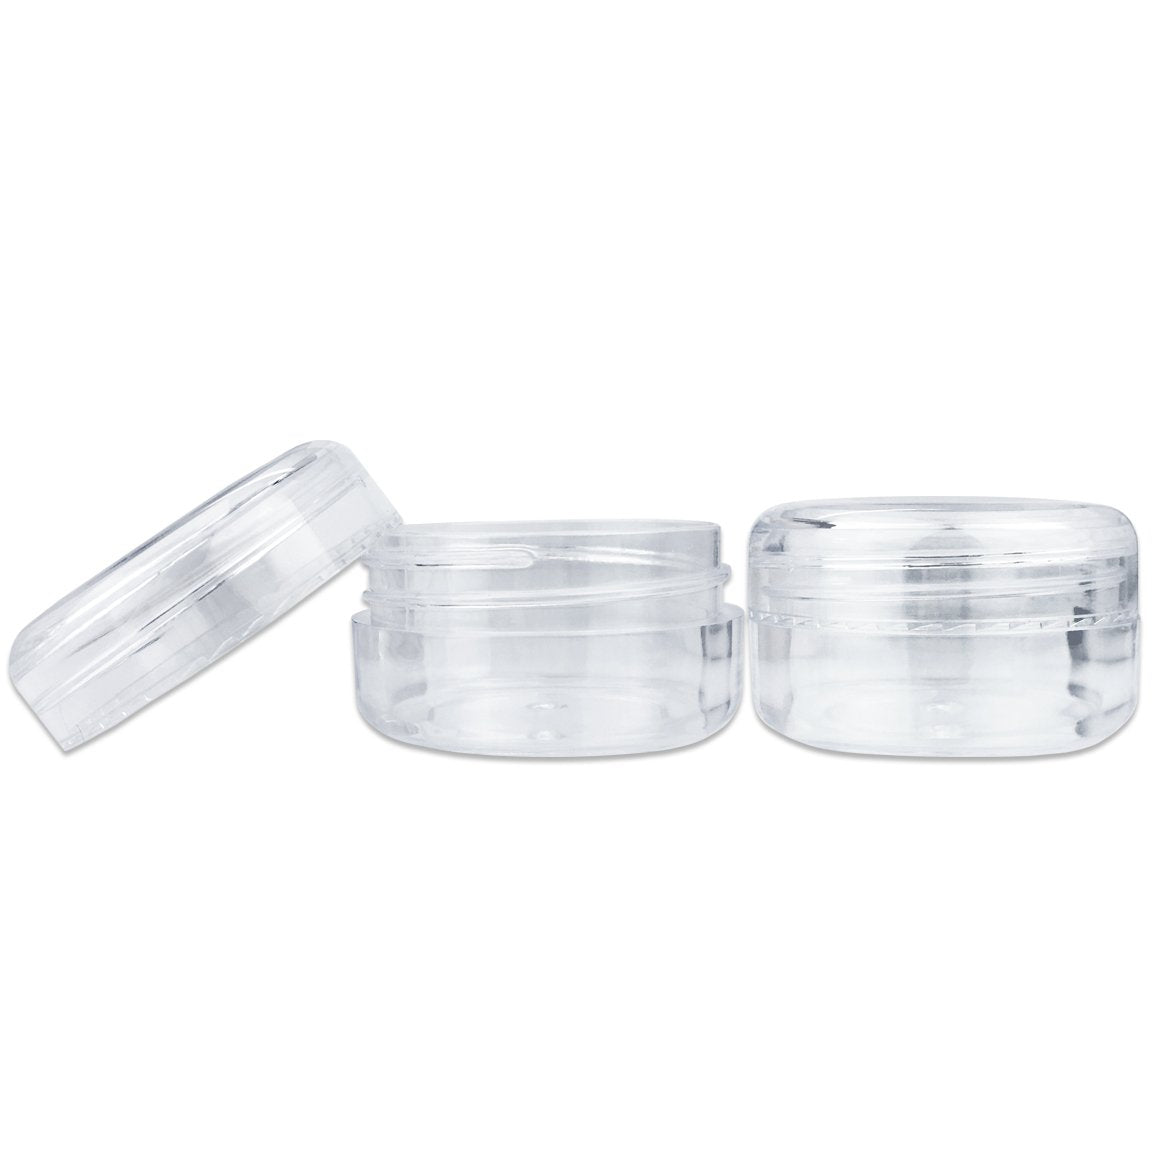 12 Pack Clear Plastic Jars Containers with Screw On Lids